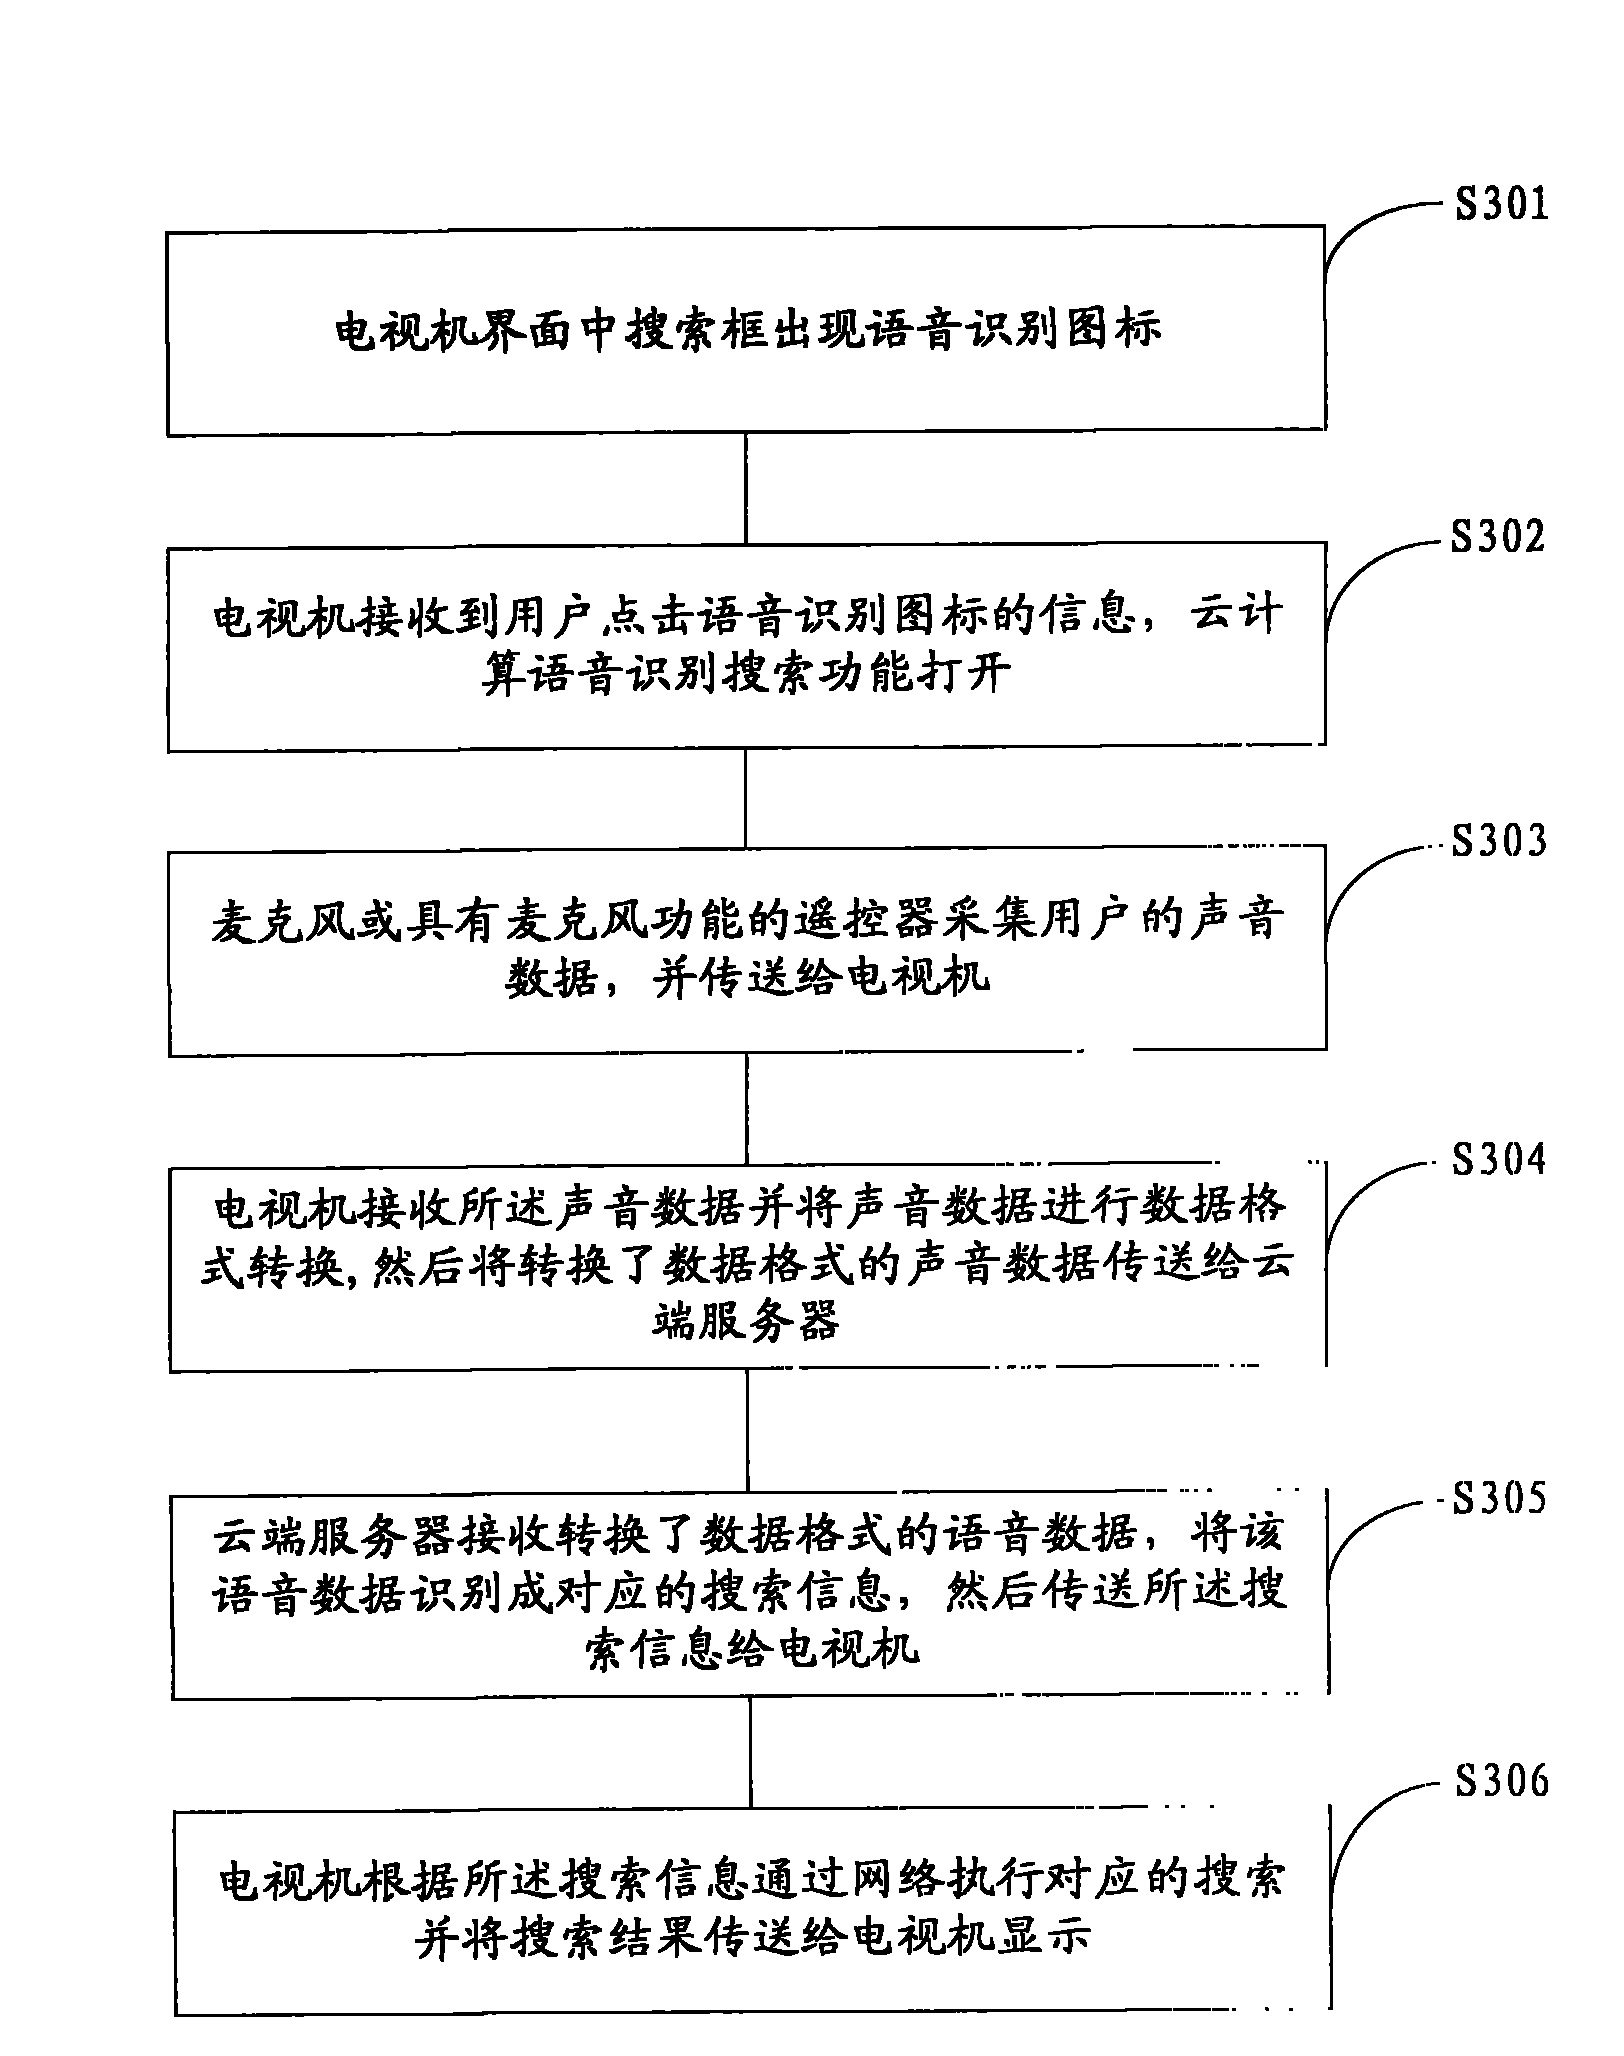 Voice controlled television, television system and method for controlling television through voice